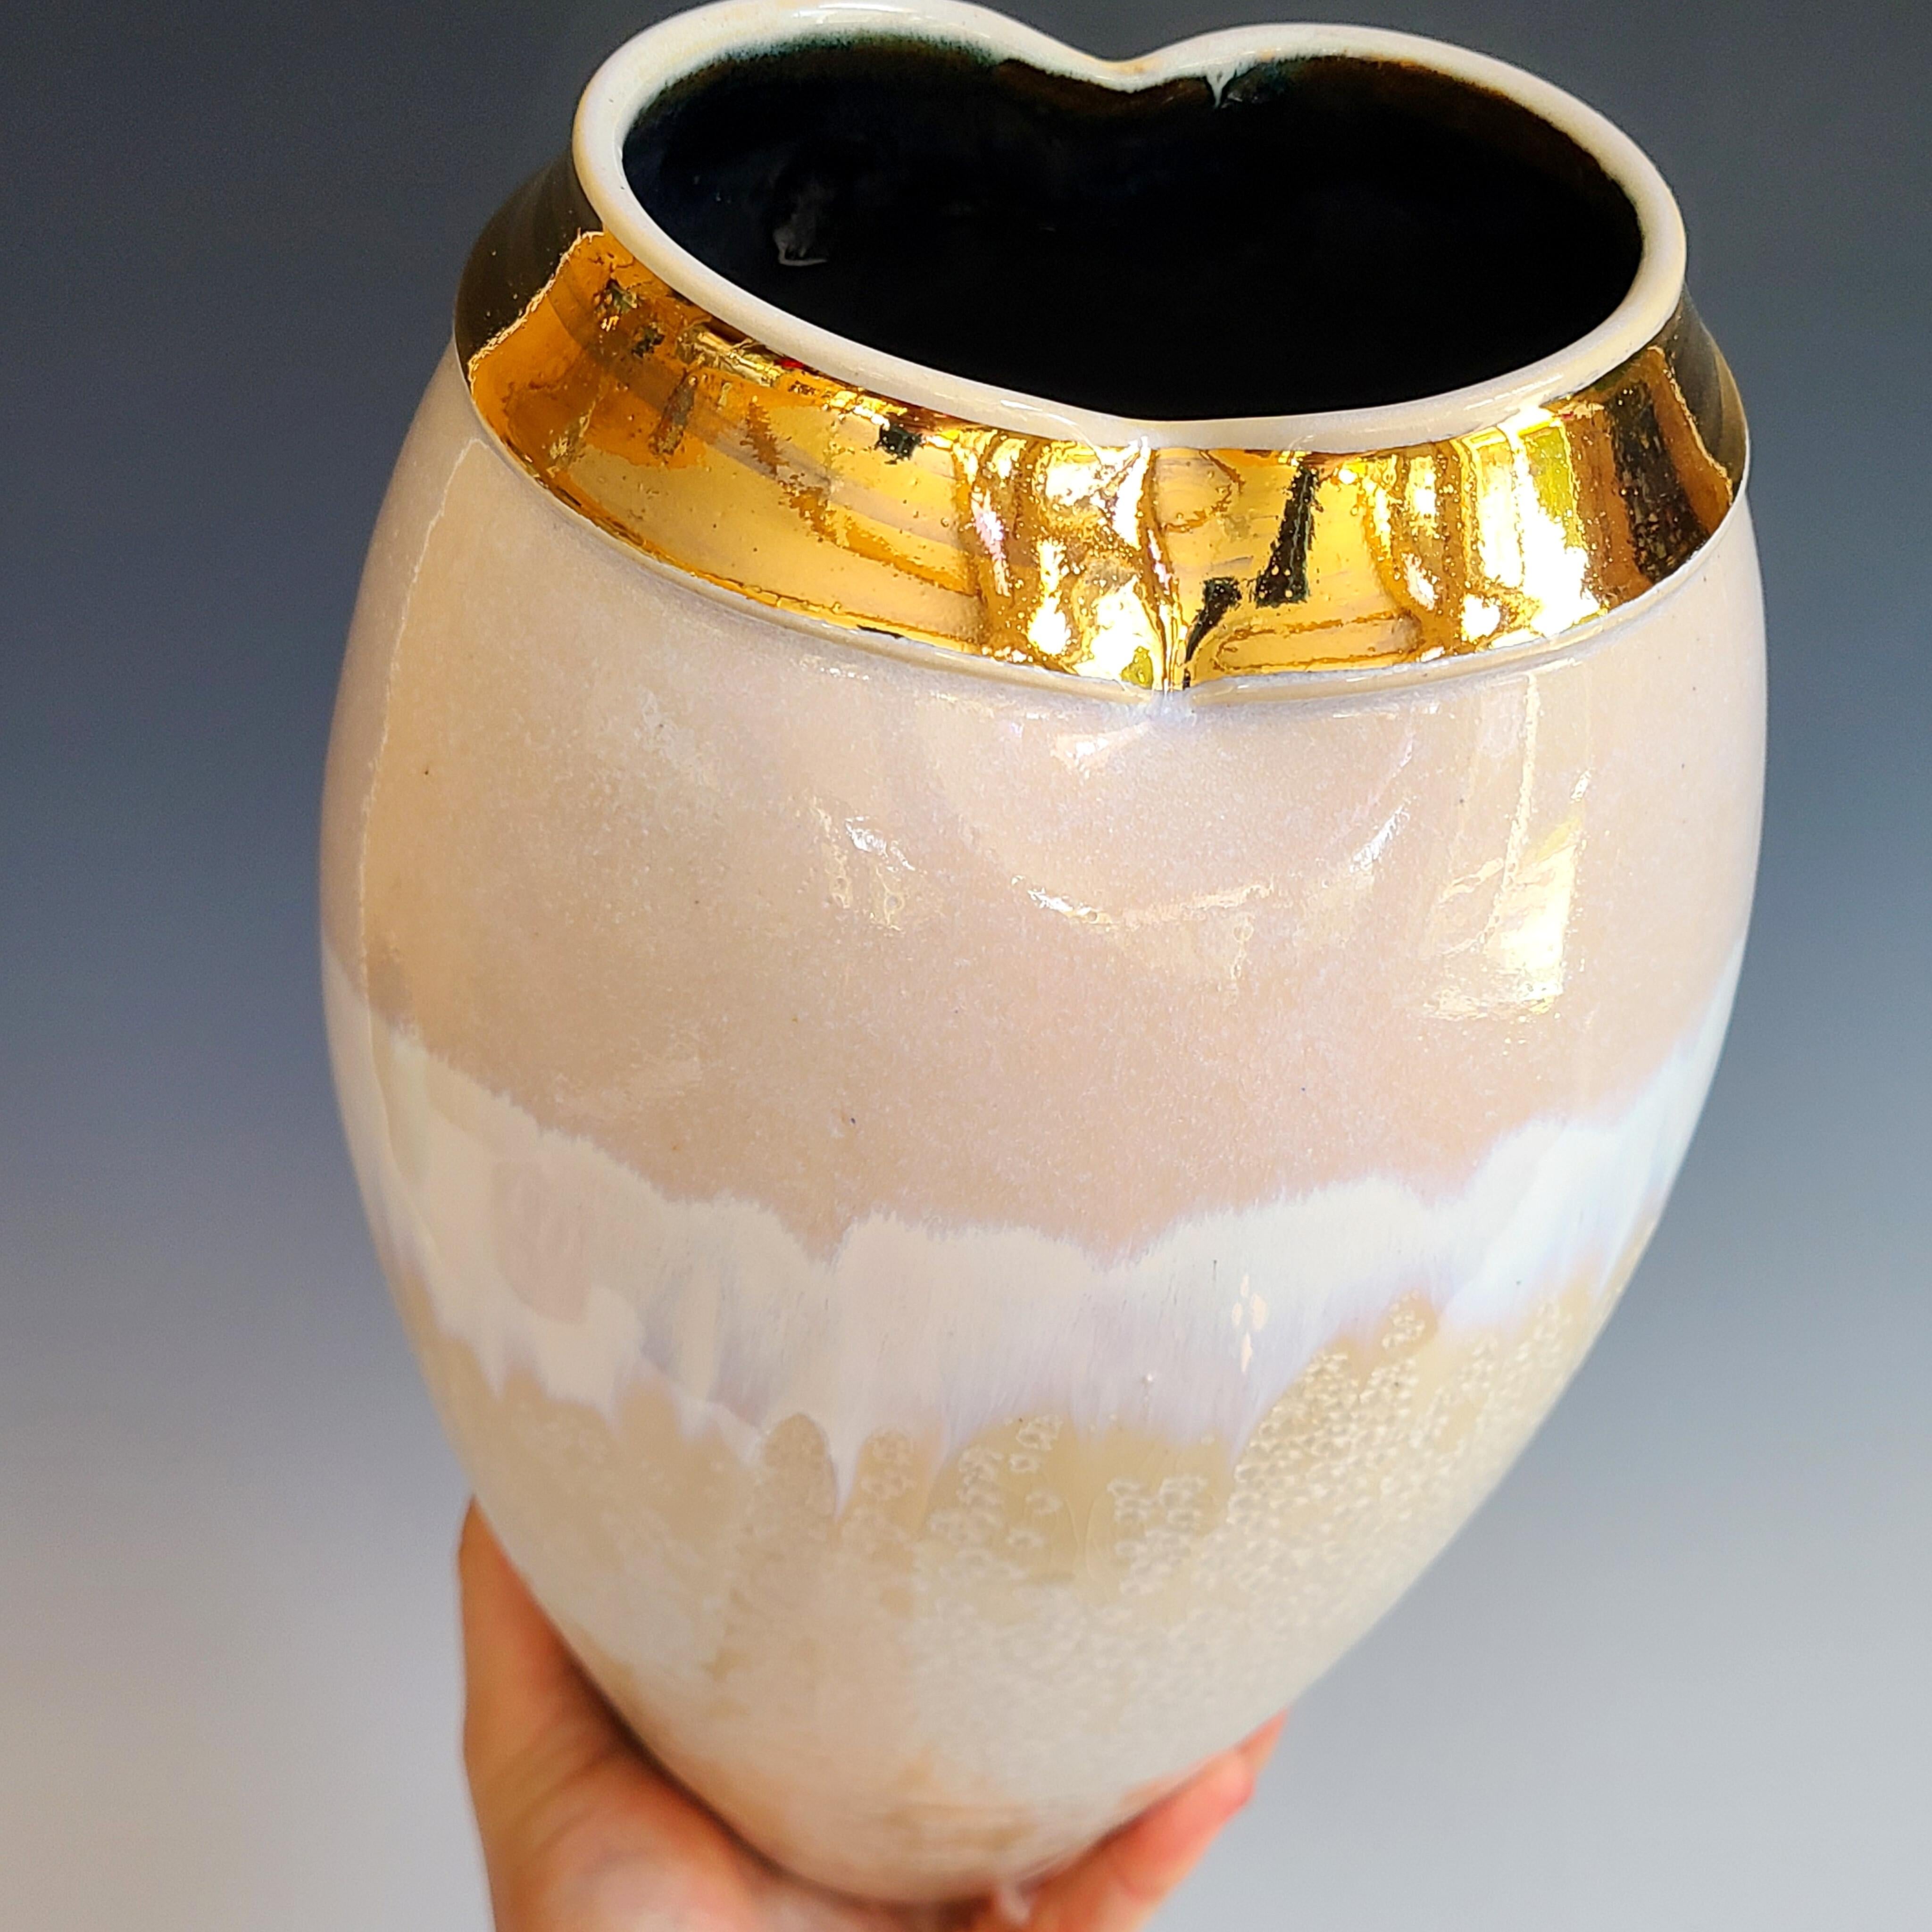 This glazed porcelain vessel by Jon Puzzuoli features a neutral, off white and white palette and a crystalline glaze over the bottom portion of the piece. It is finished with 18K gold luster on the neck. The artist's stamp is located at the base of